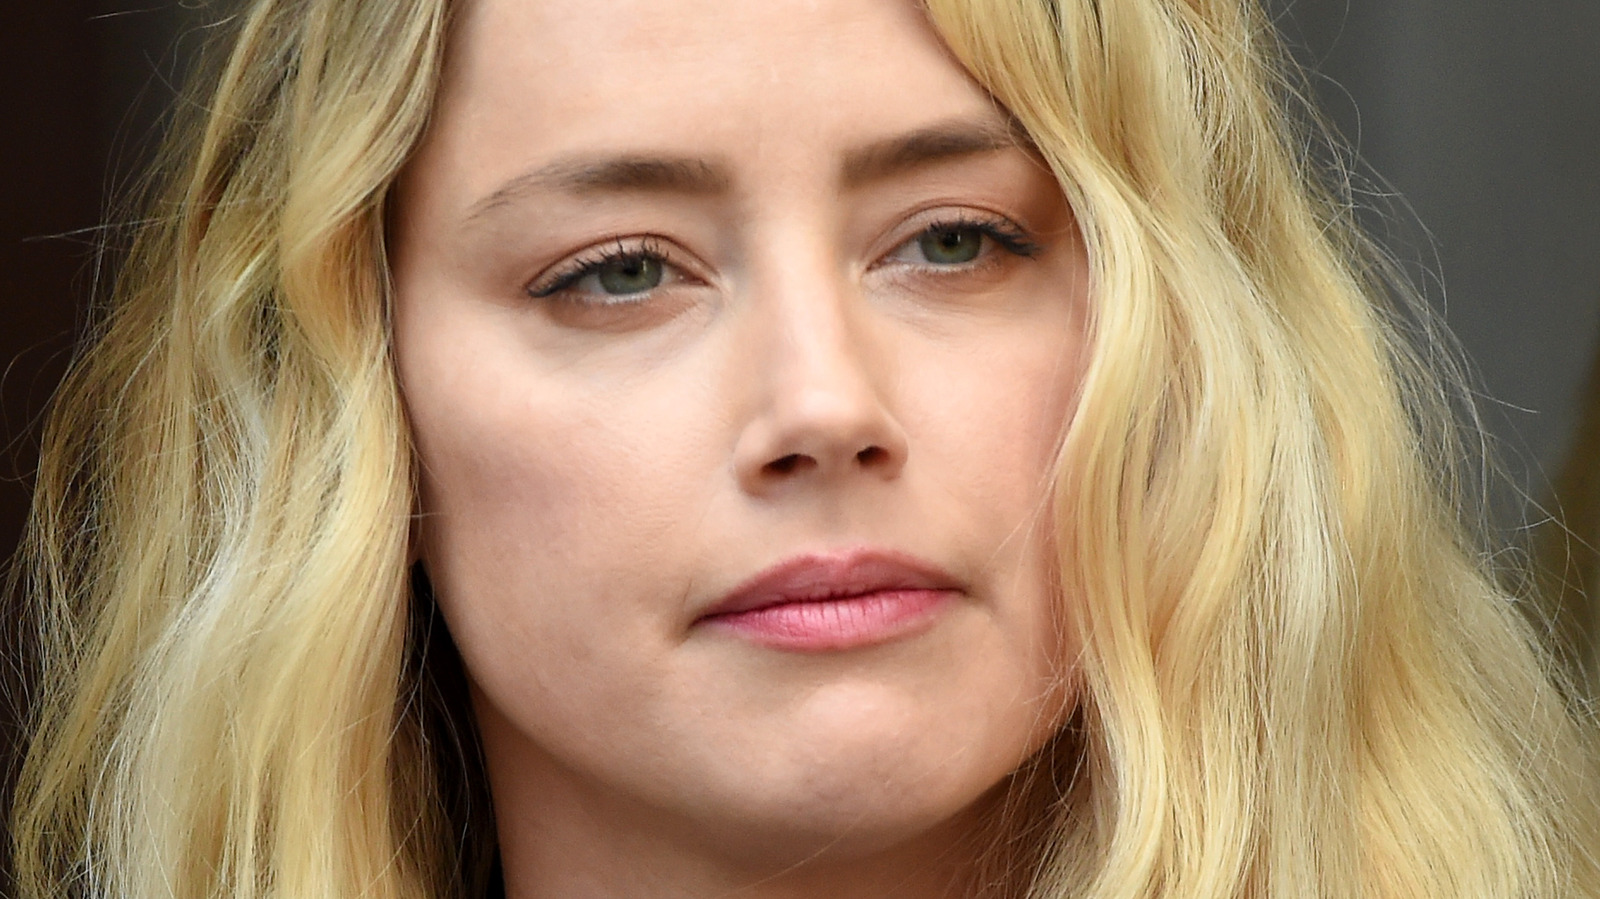 Amber Heard Makes A Rare Public Statement About Embattled Ex Johnny